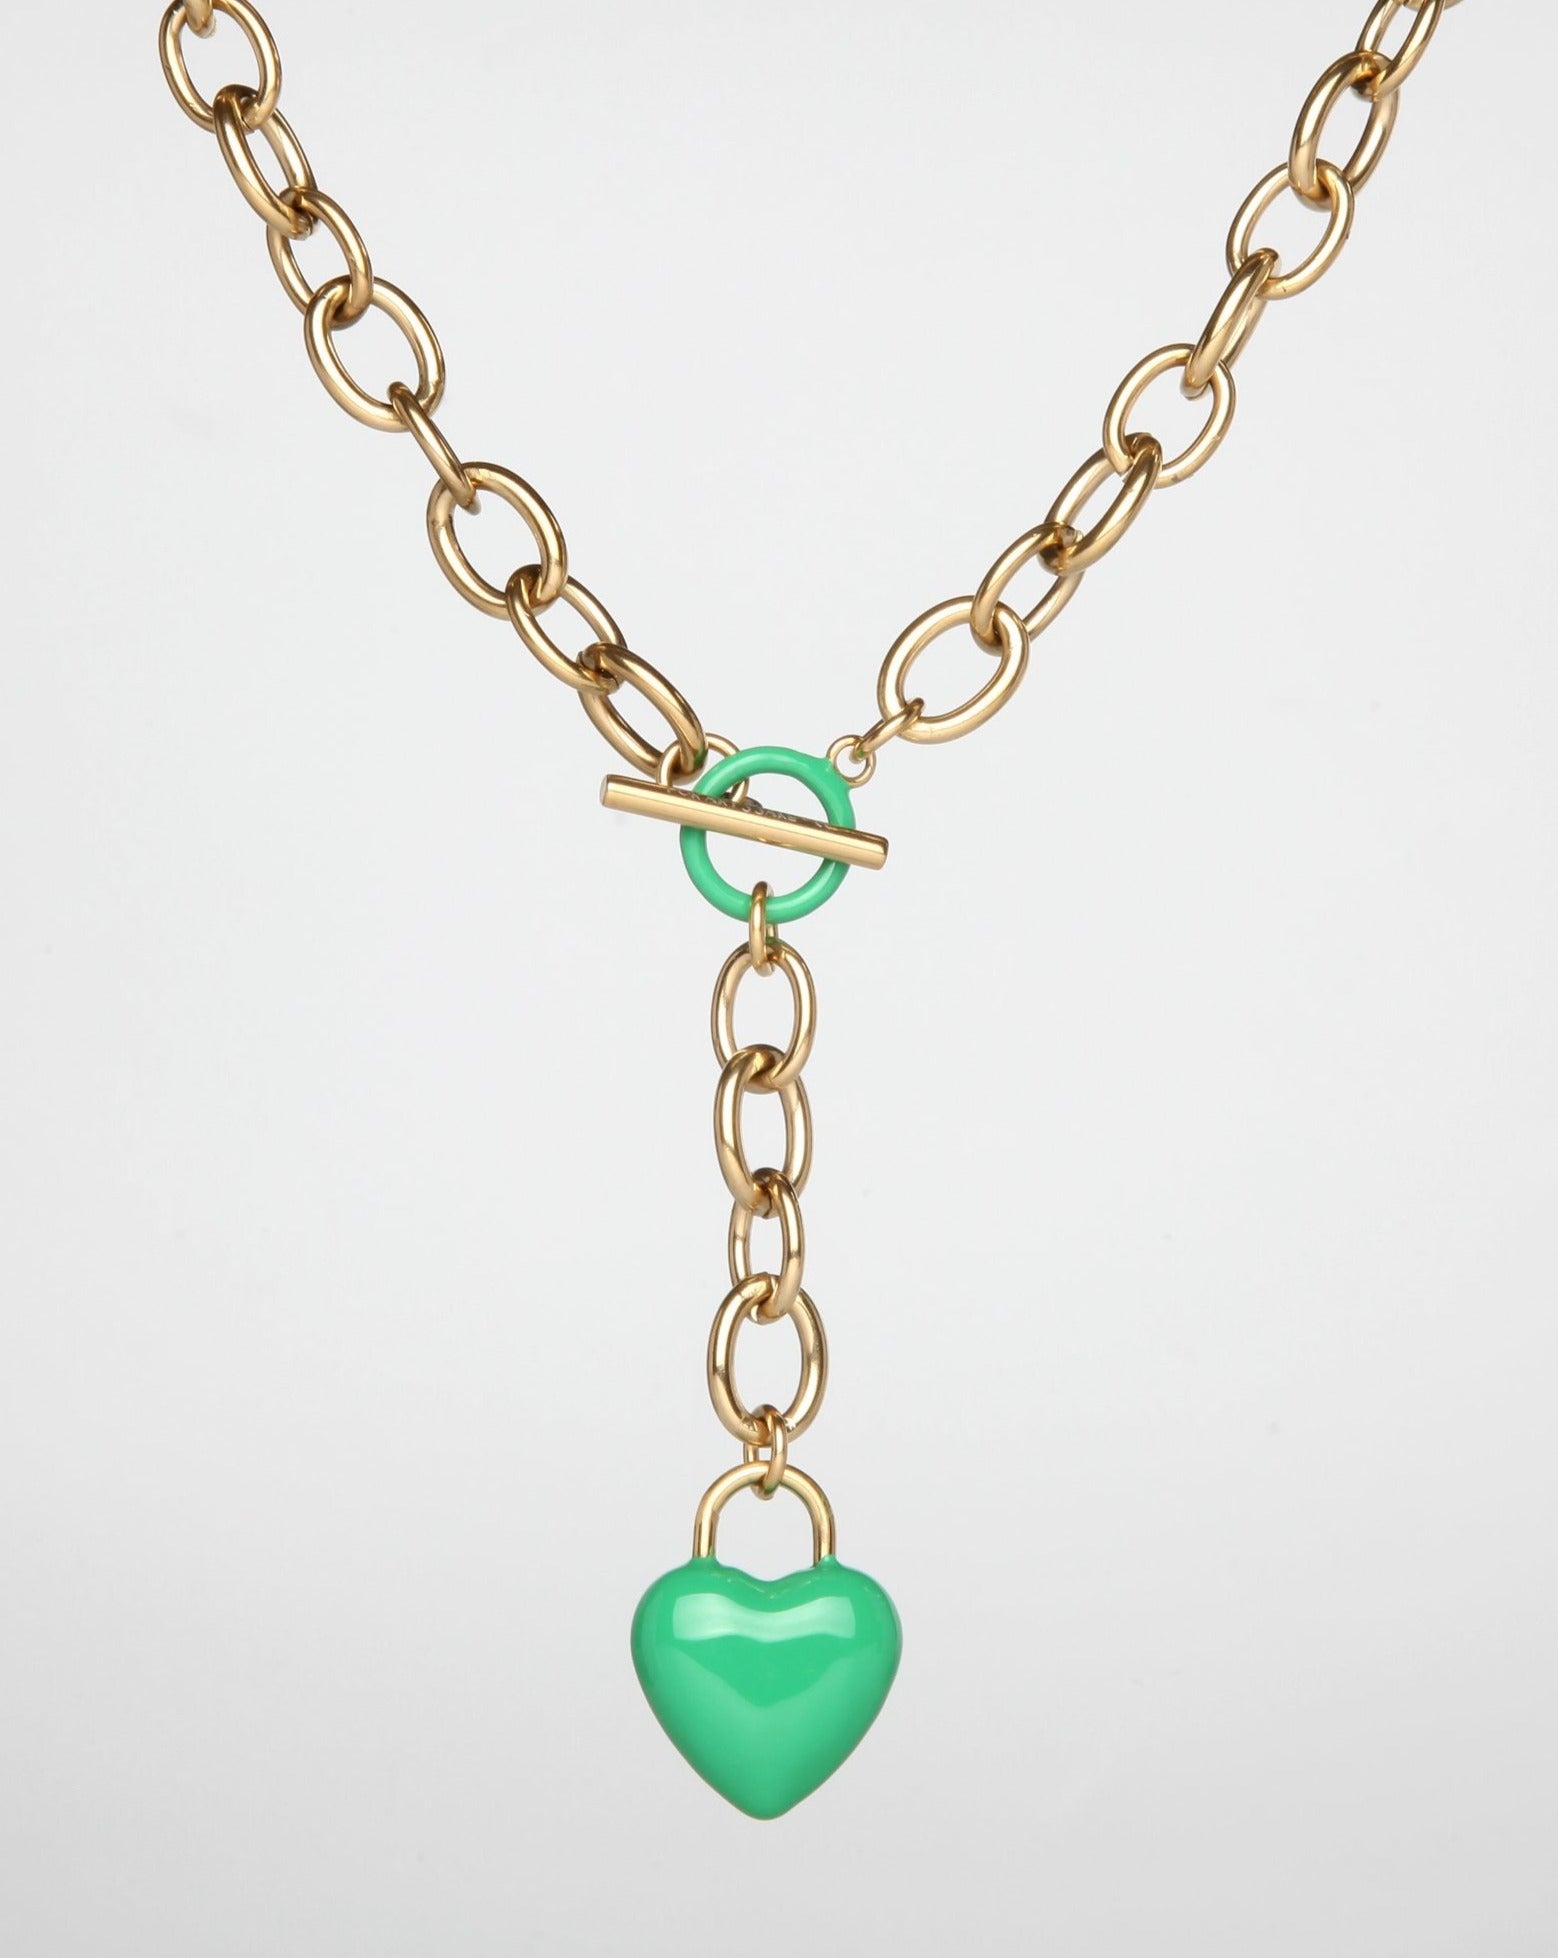 A gold necklace with a clasp and a green enamel-coated heart-shaped pendant. The Kiss Necklace Pink by For Art's Sake® features large interlocking links and a toggle closure, with the vibrant heart hanging at the center of the chain on a short length of additional links.